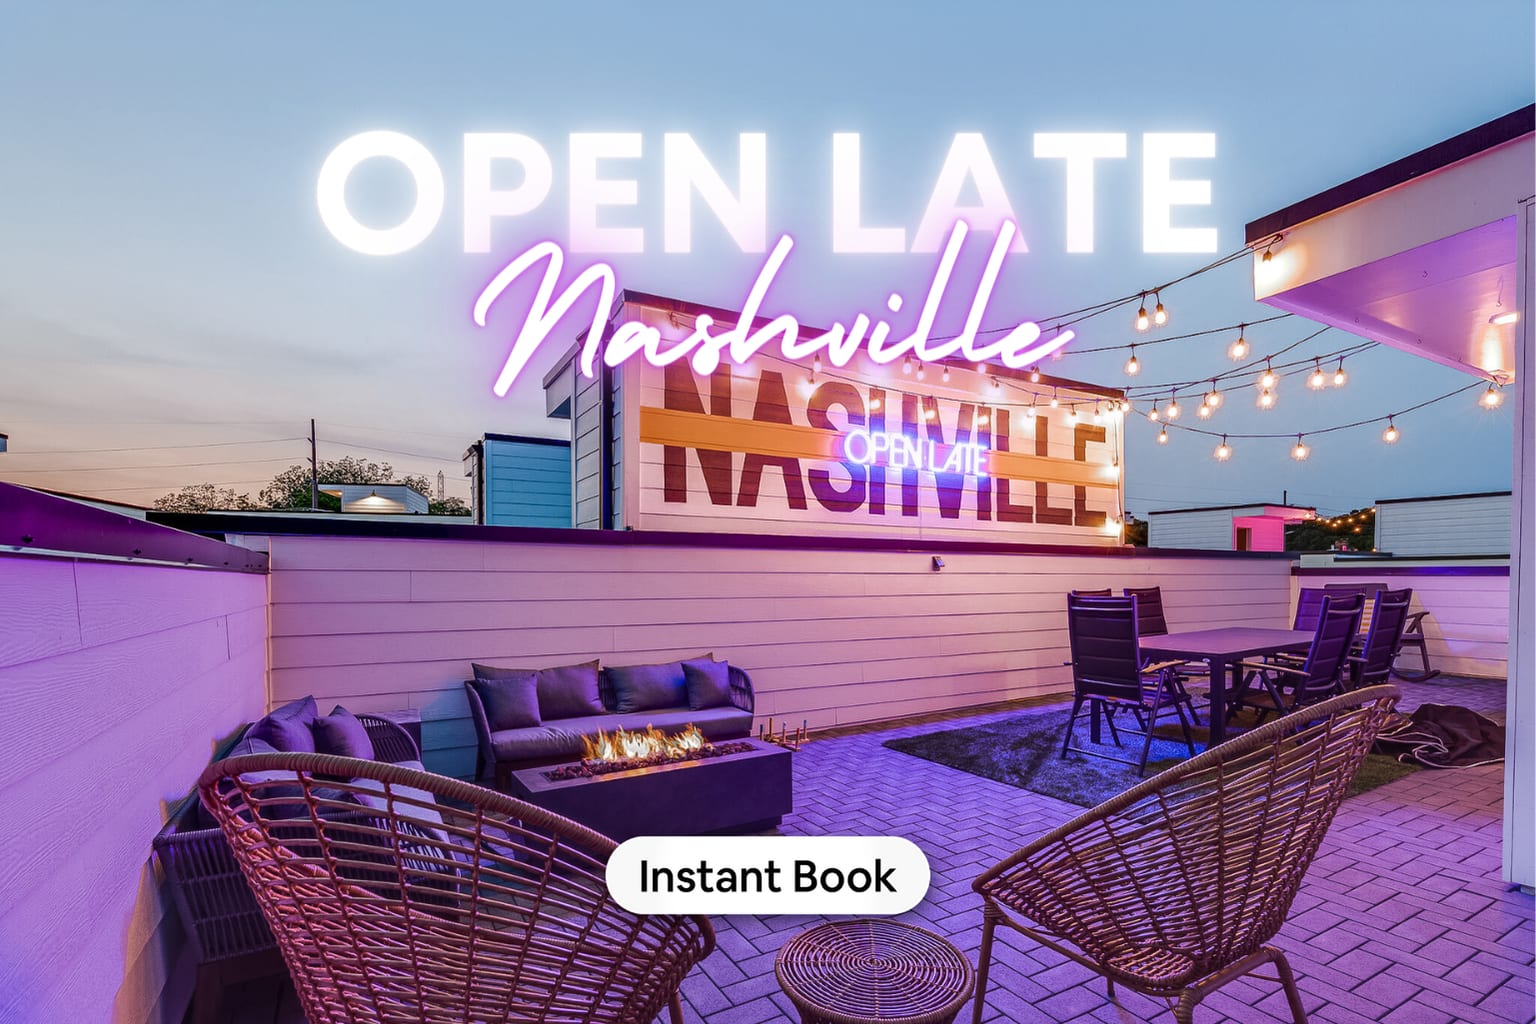 Experience the ultimate Nashville evening on our luxurious rooftop, designed for both celebration and relaxation. Picture yourself lounging on plush sofas by the fire pit, dining under the twinkling string lights, or just soaking up the vibrant vibe with neon signs that light up the night. Perfect for any vacation from bachelorette parties to family getaways, our Music City rooftop at Misfit Homes is where memories are made. 🌟🎶

Book today and let Nashville's charm be the backdrop of your memories!